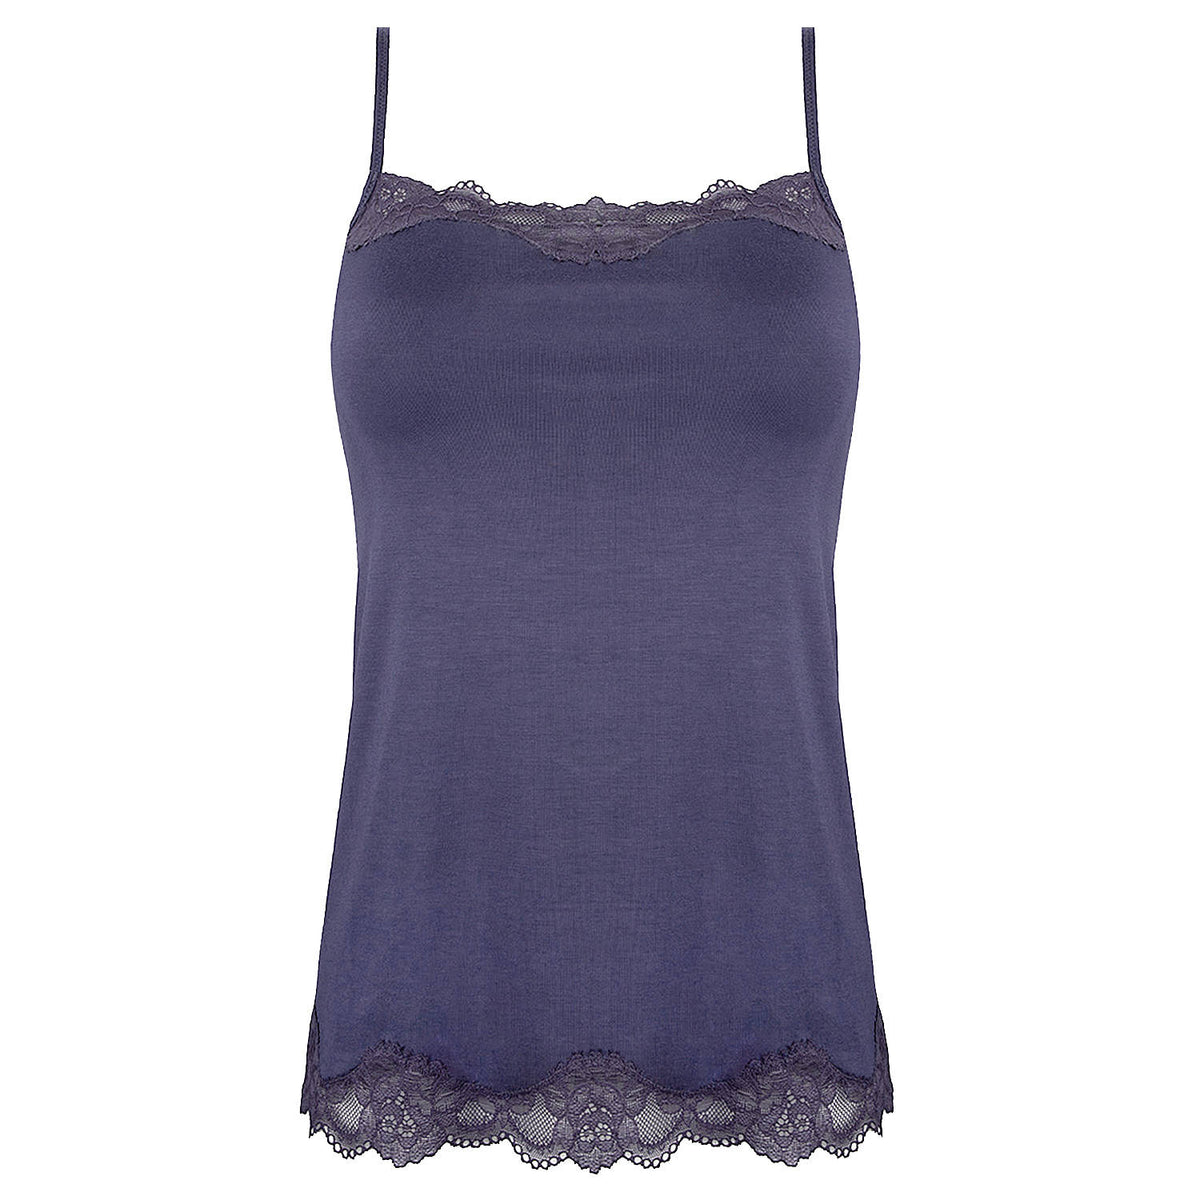 ANTIGEL SIMPLY PERFECT CAMISOLE - BLUE PURPLE